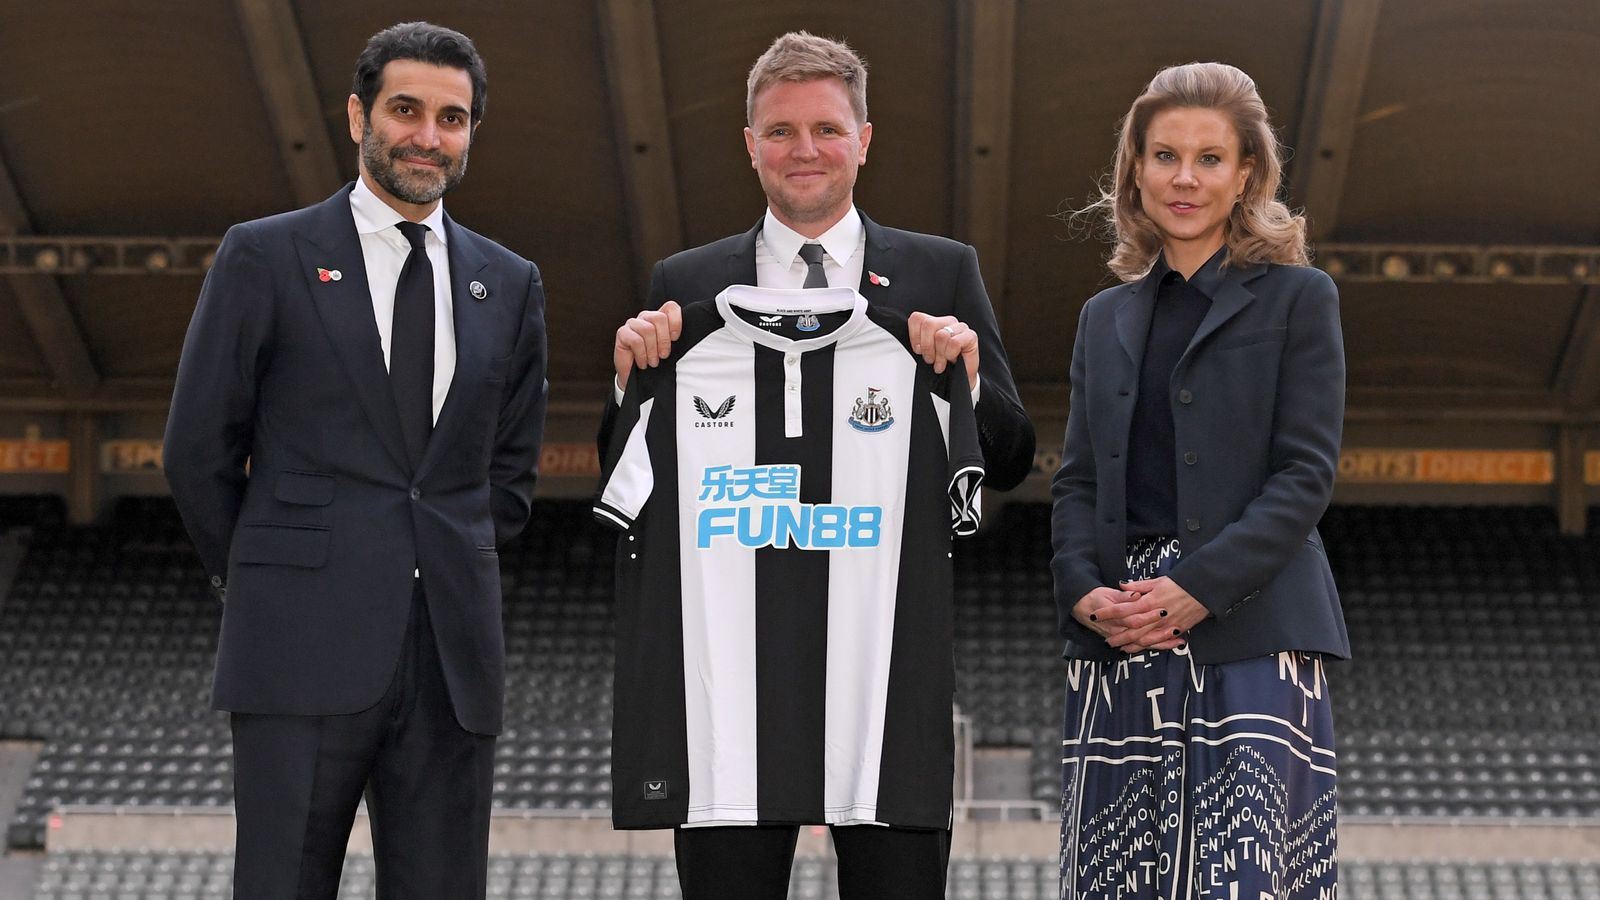 Newcastle transfers Q&A: Who will Eddie Howe sign this summer and how much will they spend?